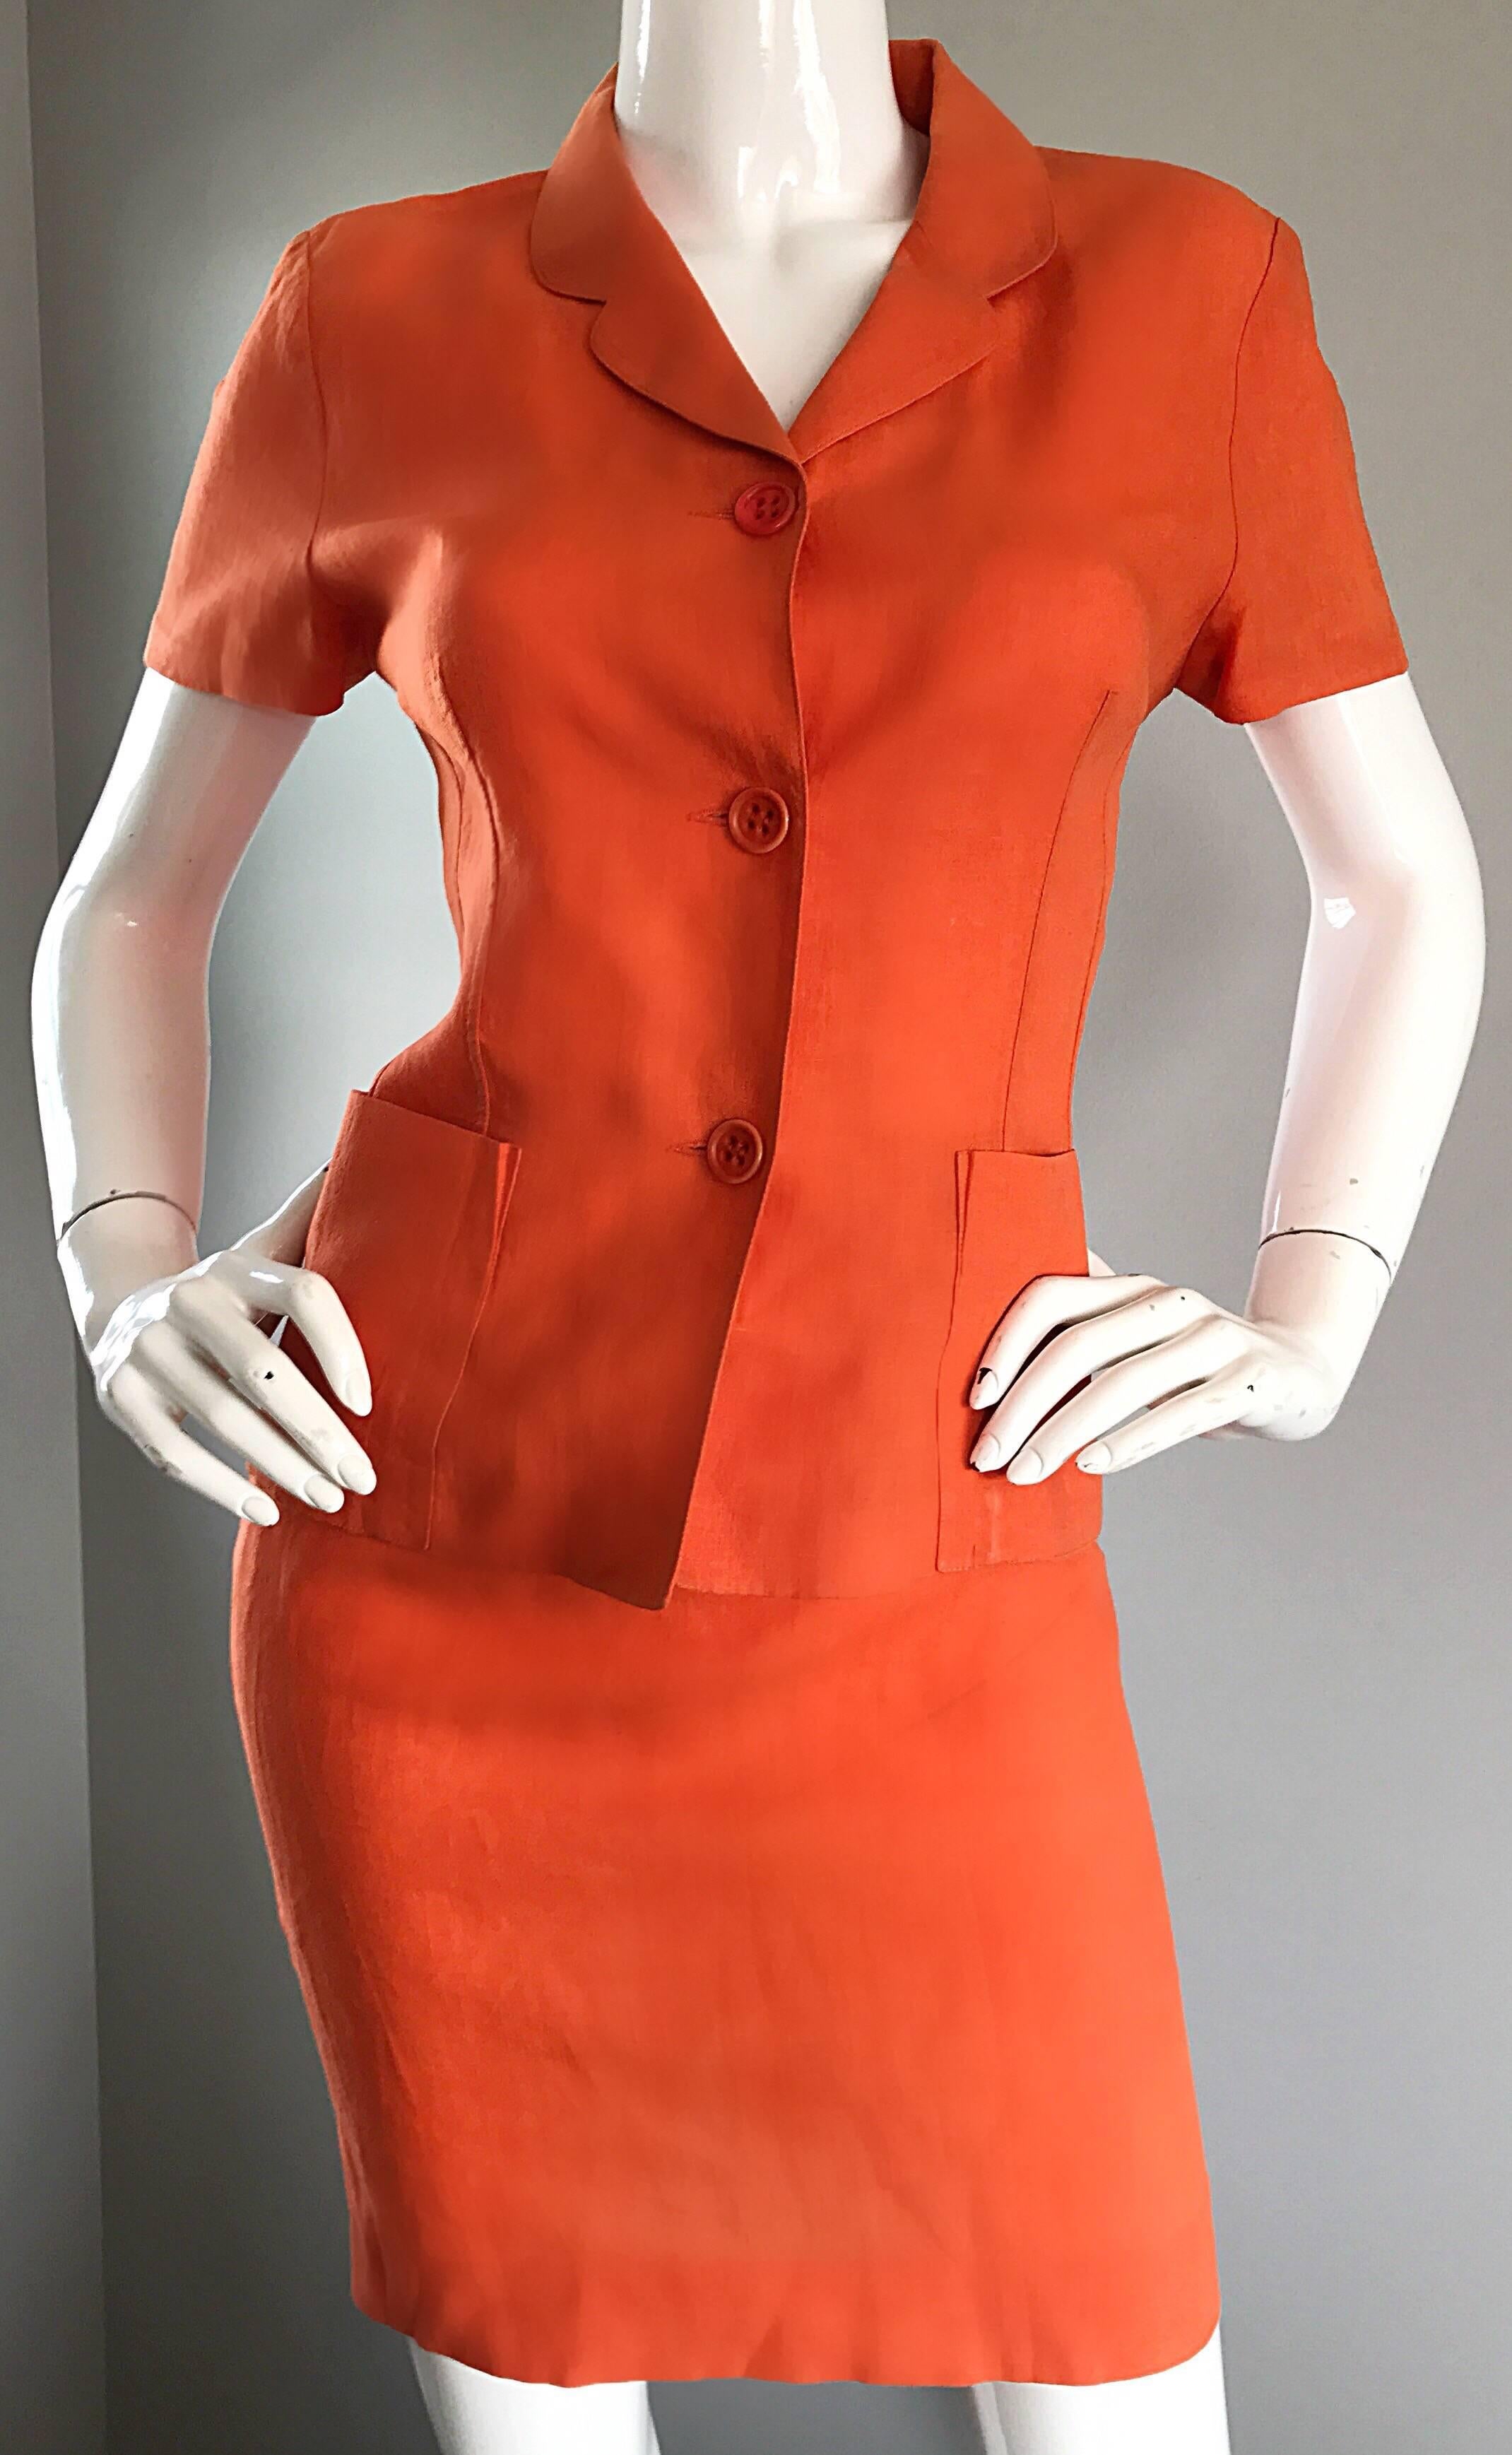 Red 1990s Kenzo Bright Orange Linen Vintage Short Sleeve Two Piece Jacket Skirt Suit For Sale